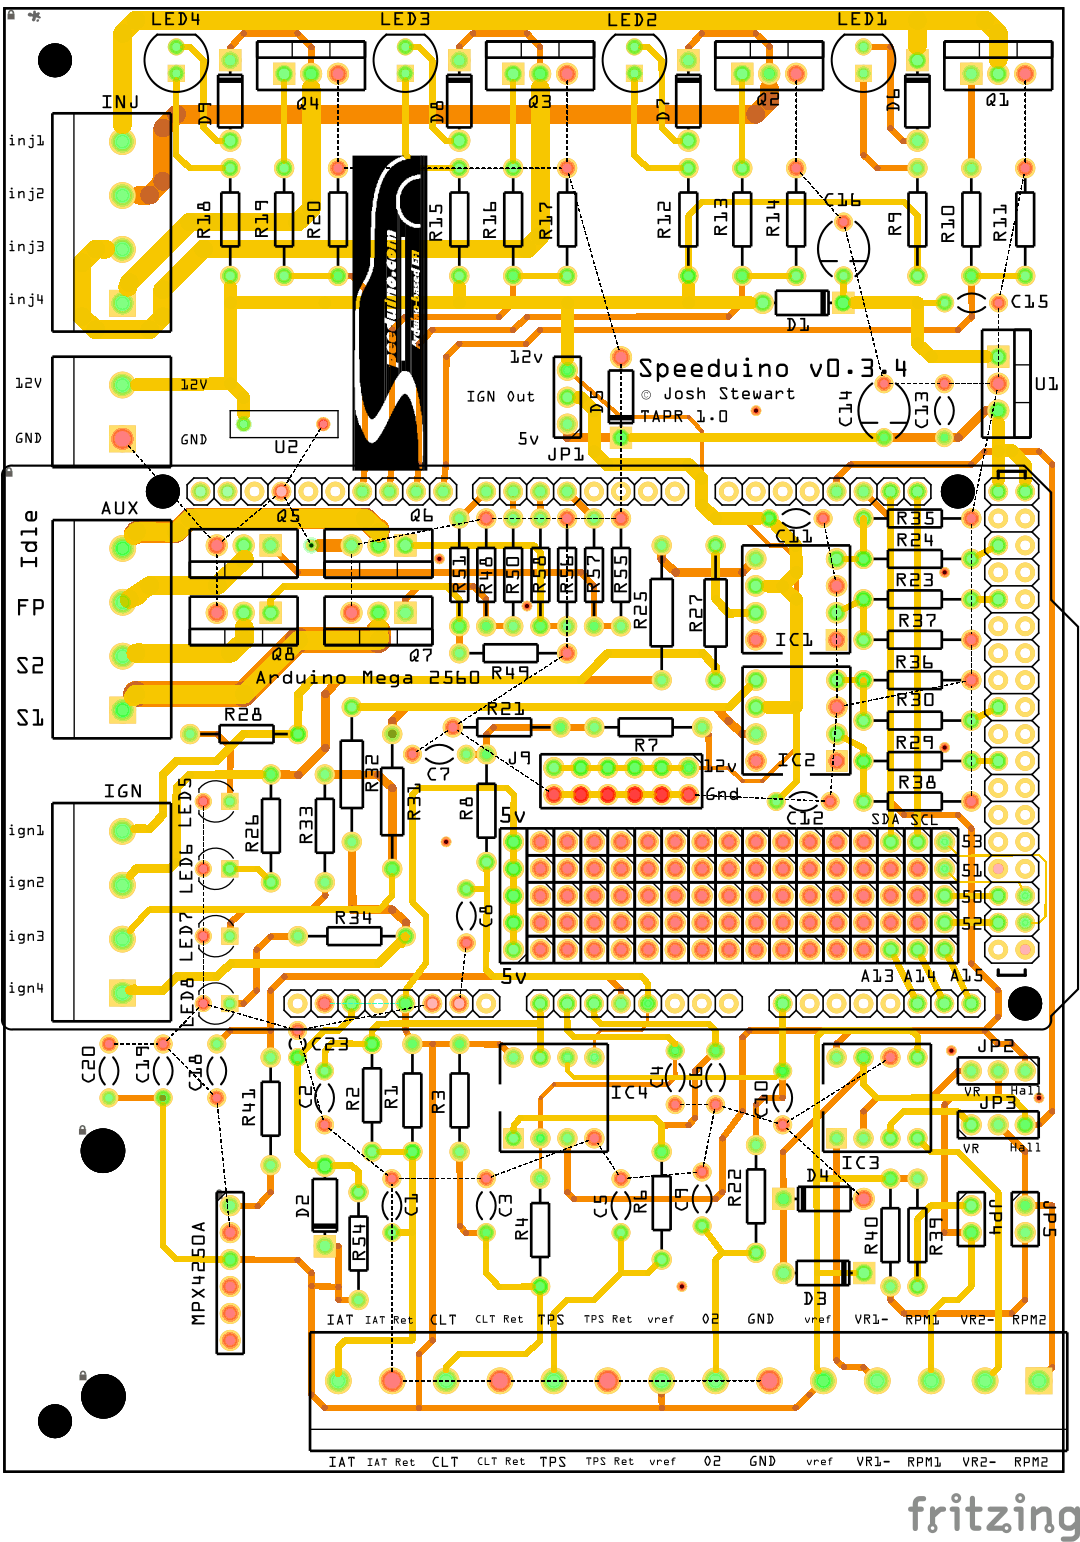 schematic v0.3.4_pcb.png